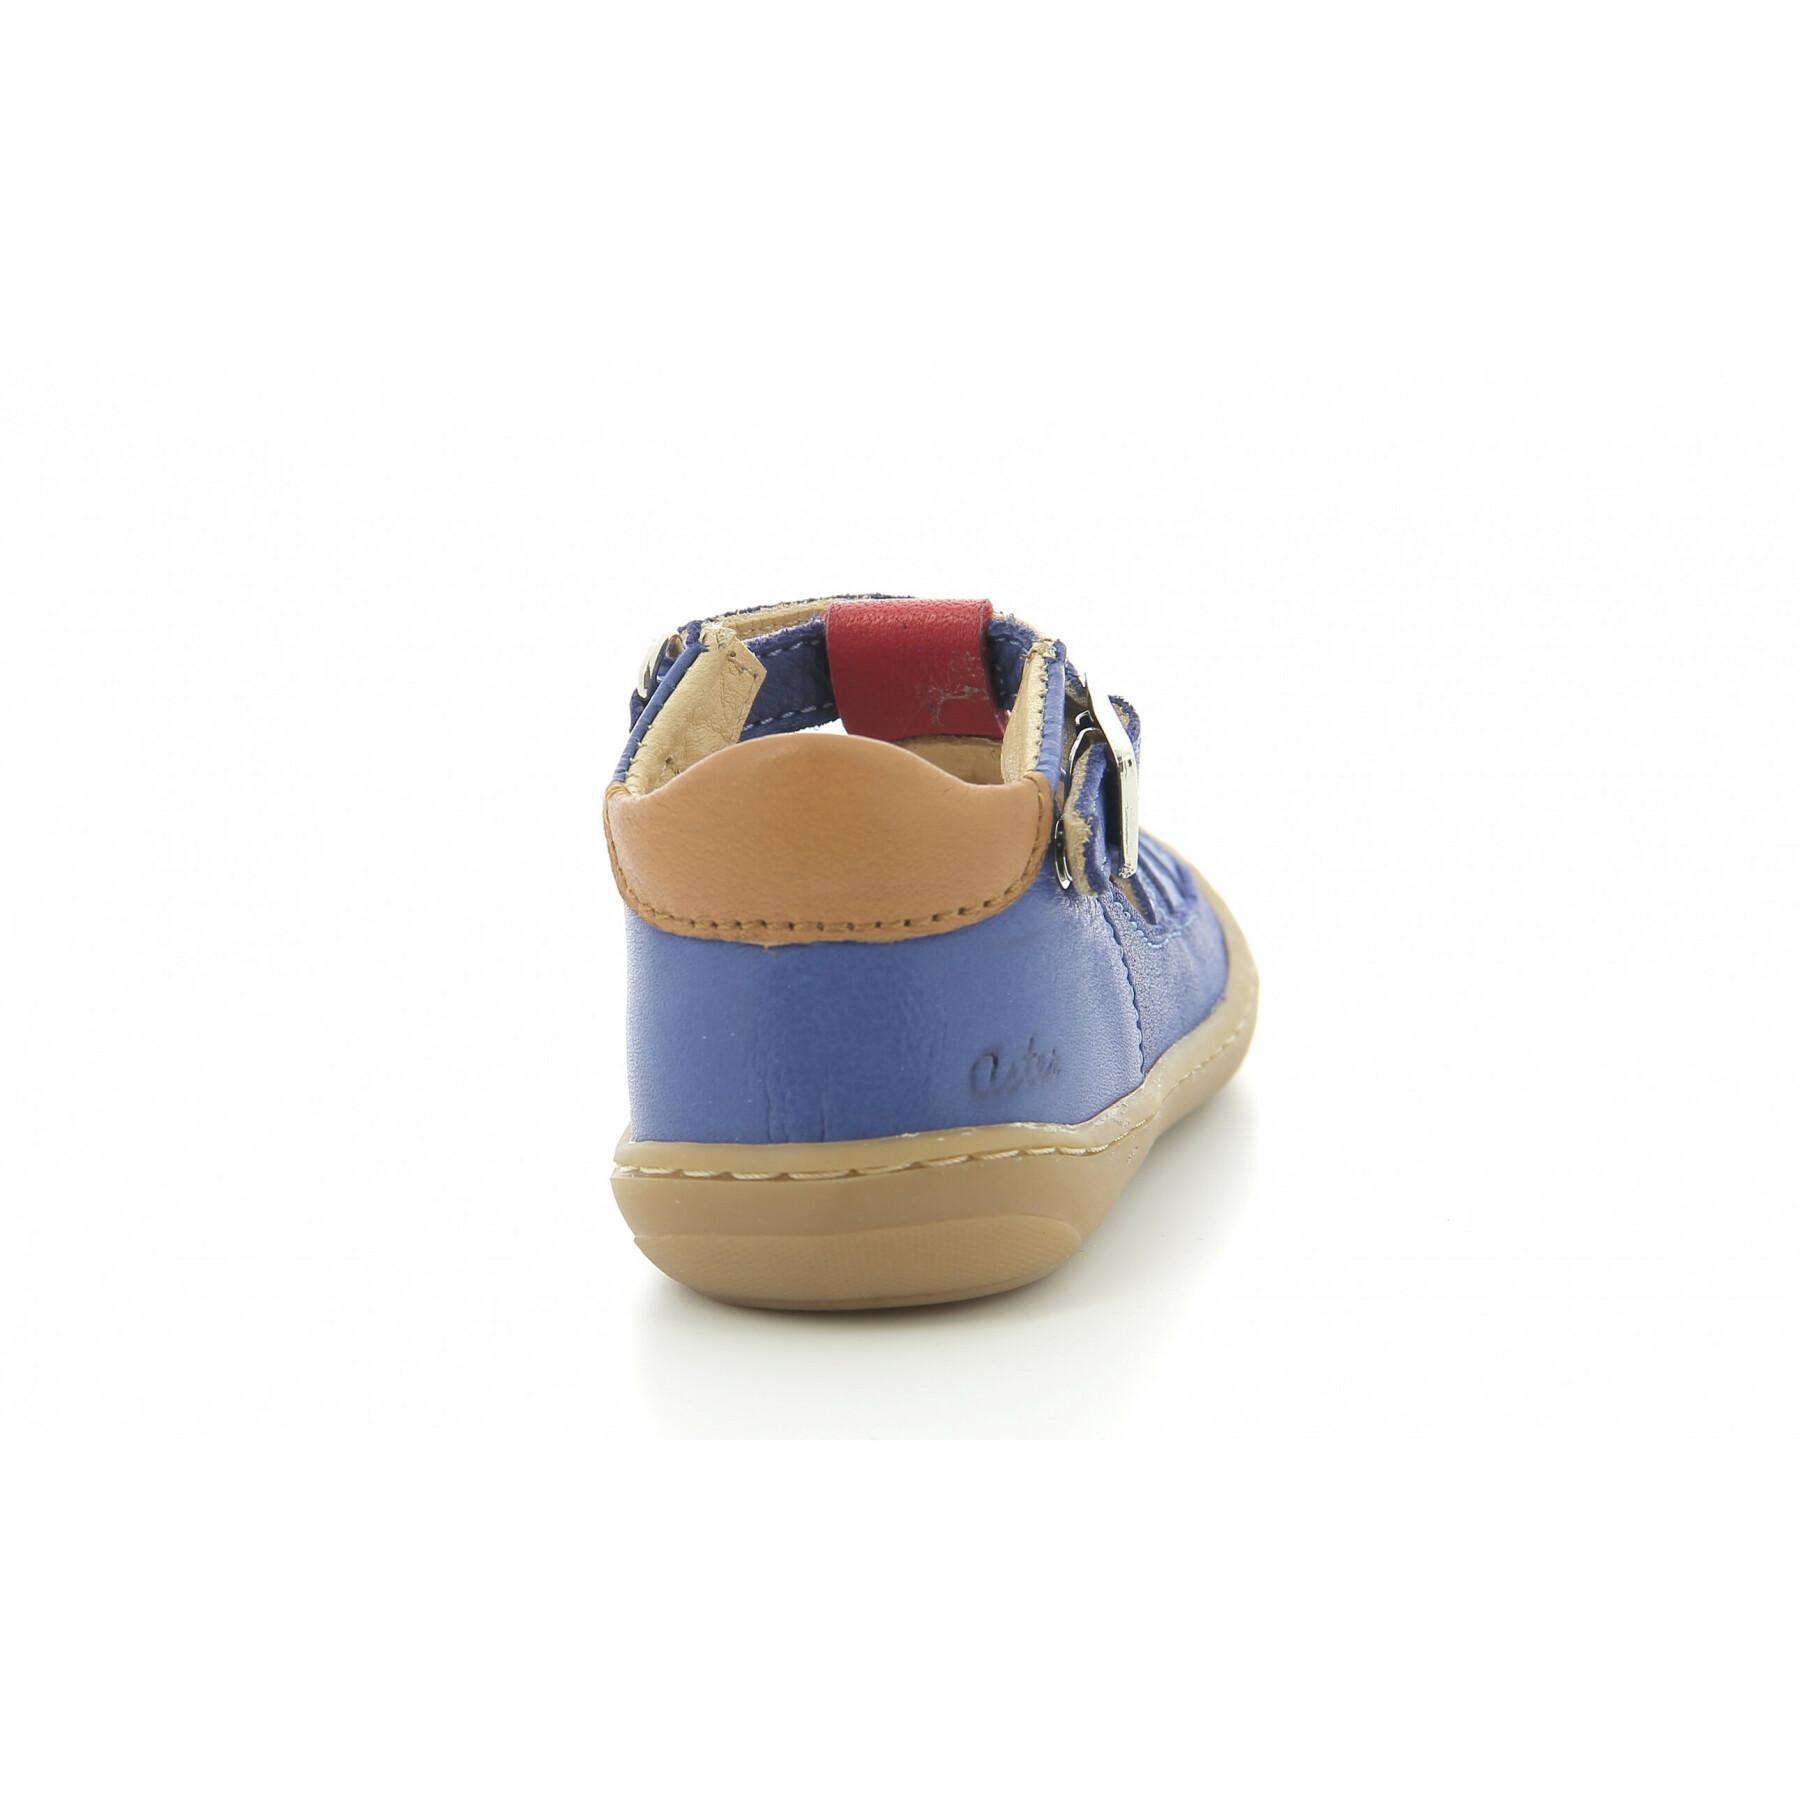 Baby boy sandals Aster Crusile